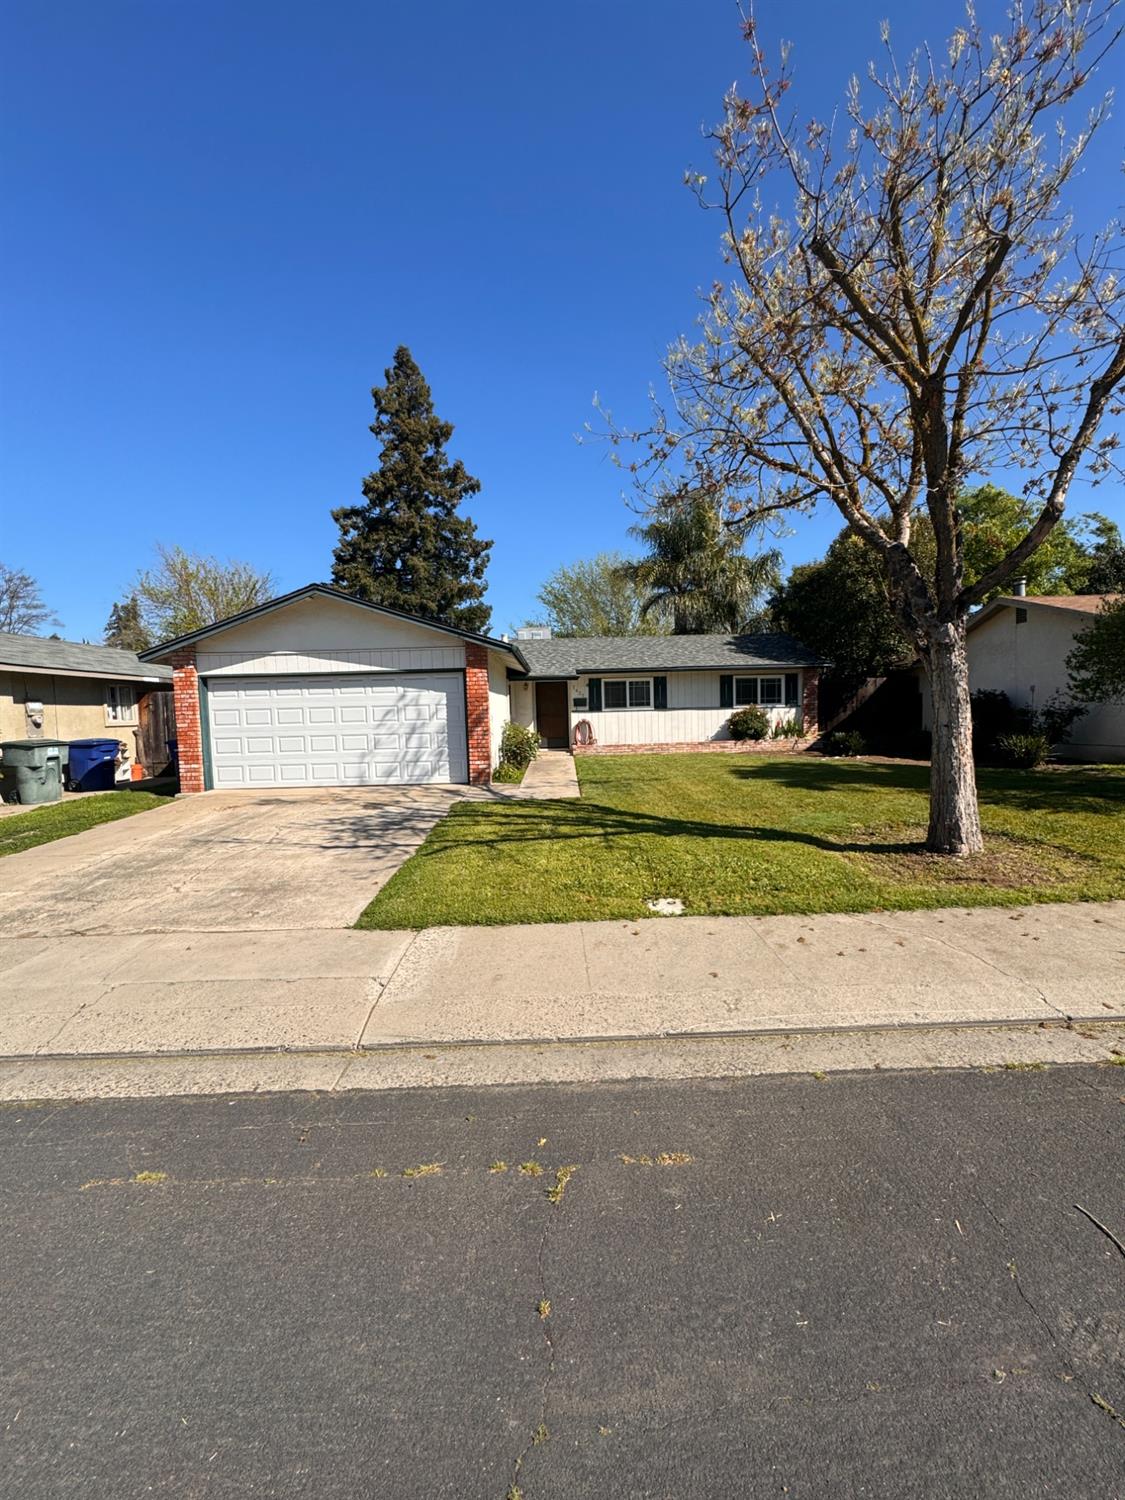 Photo of 1421 Woodside Dr in Modesto, CA